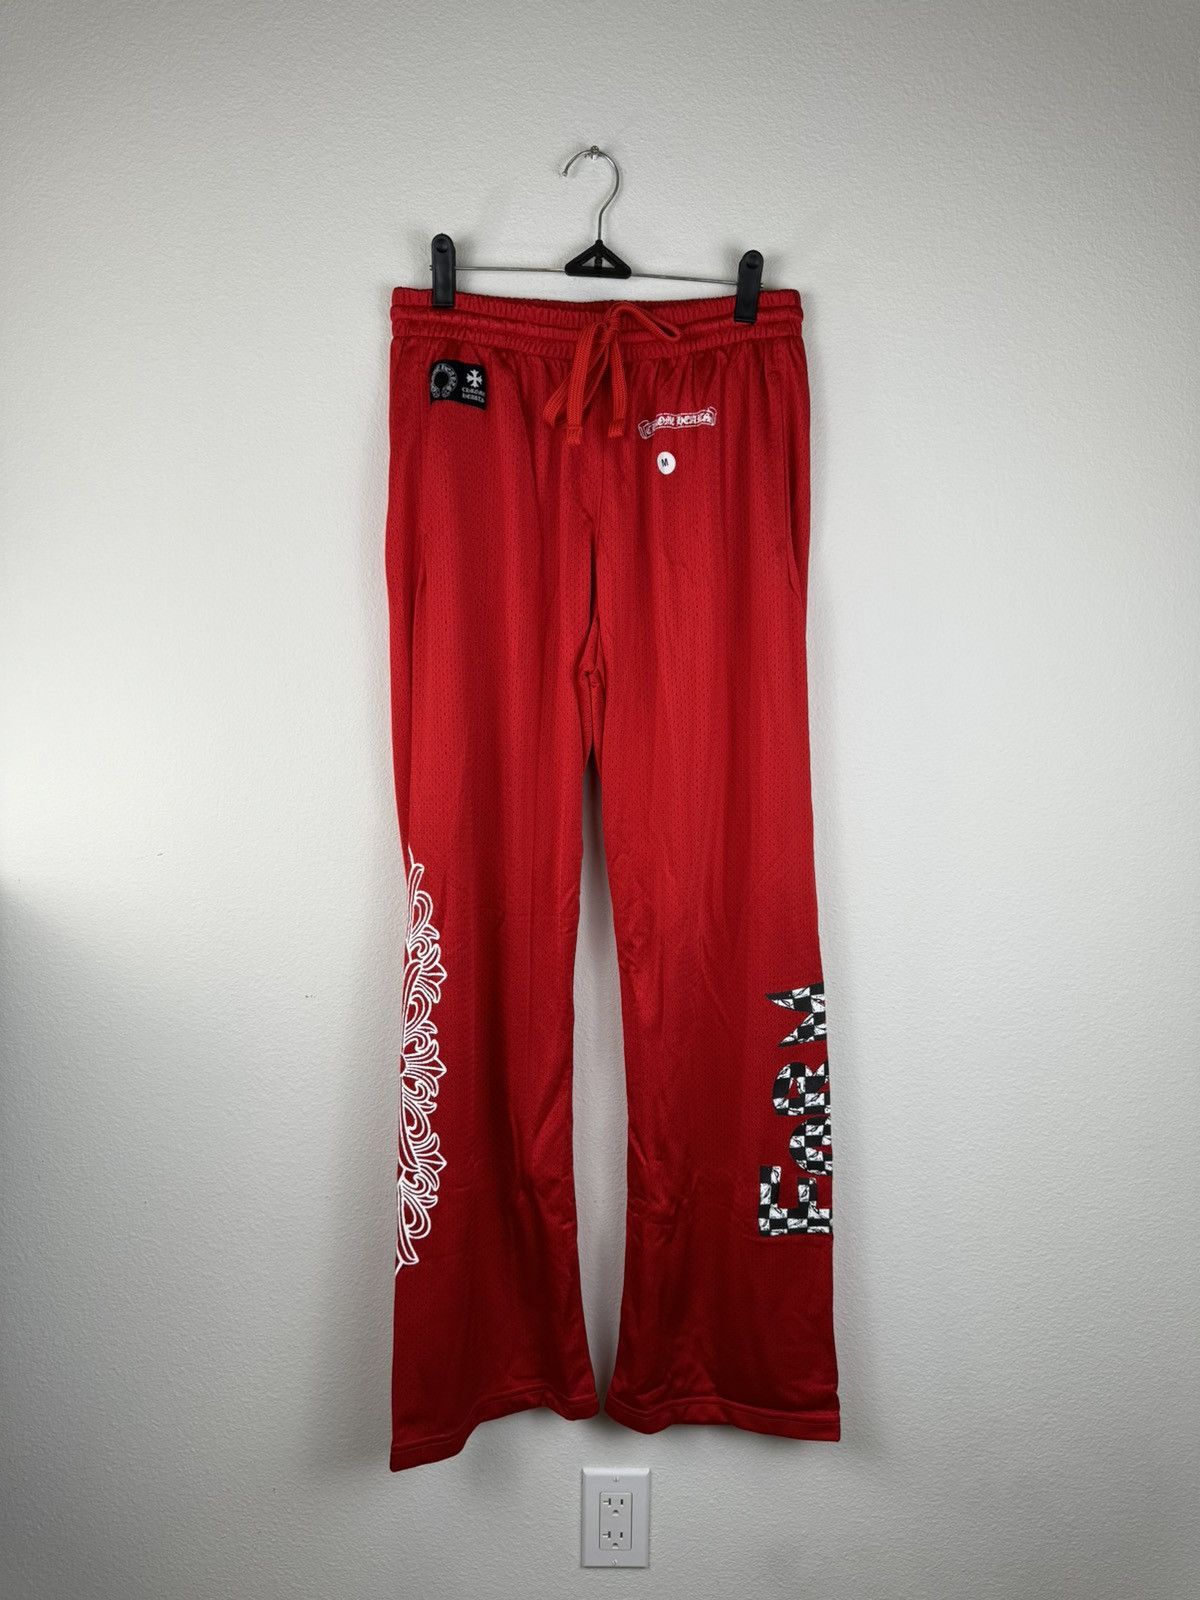 Pre-owned Chrome Hearts Matty Boy Ppo Form Varsity Warm Up Pants In Red